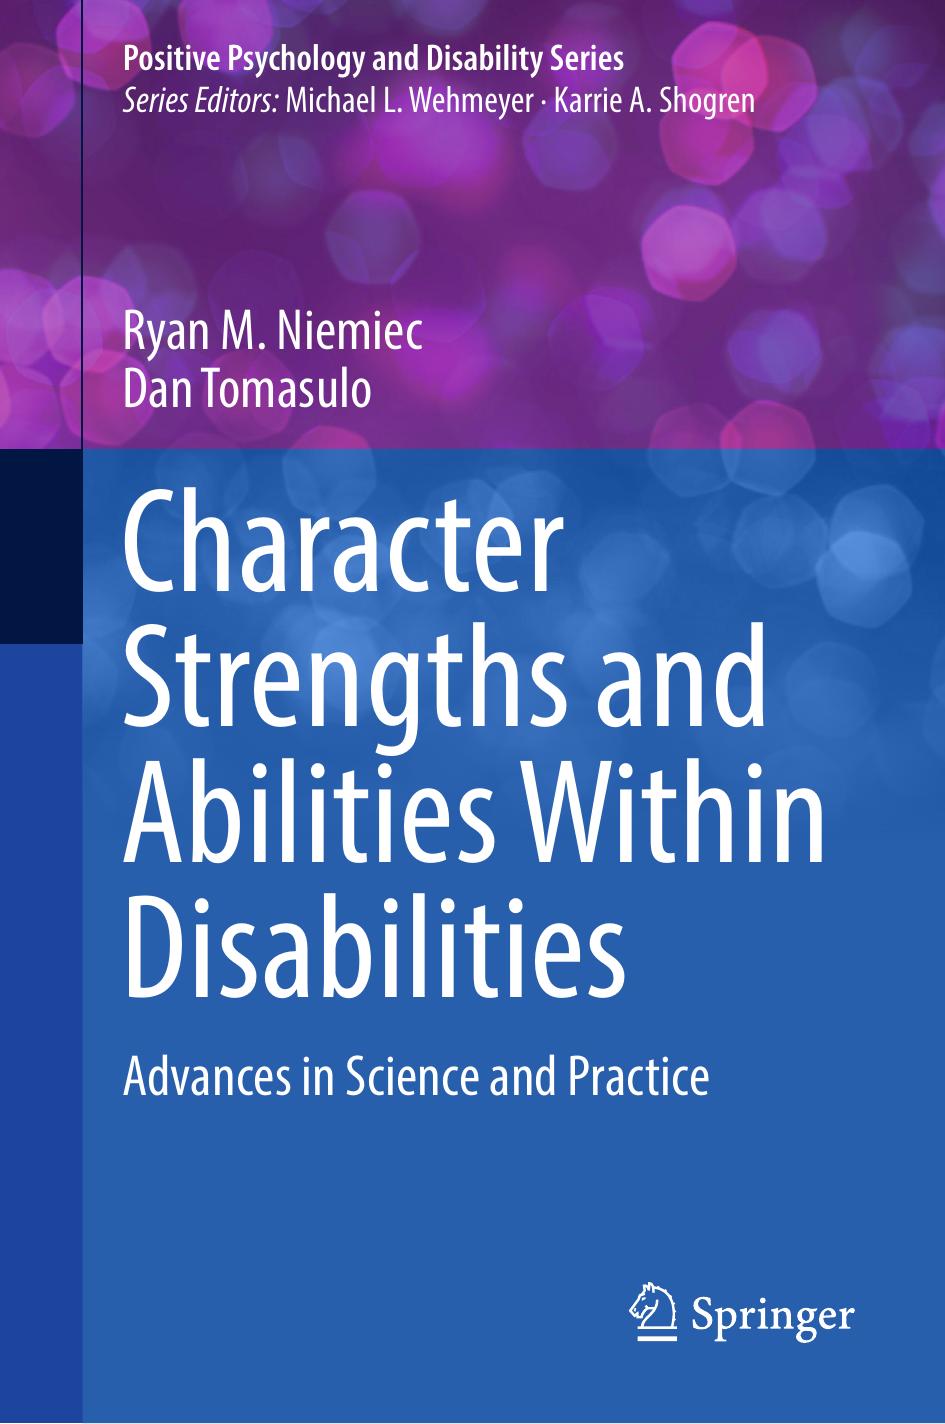 Character Strengths and Abilities Within Disabilities: Advances in Science and Practice by Ryan M. Niemiec Dan Tomasulo